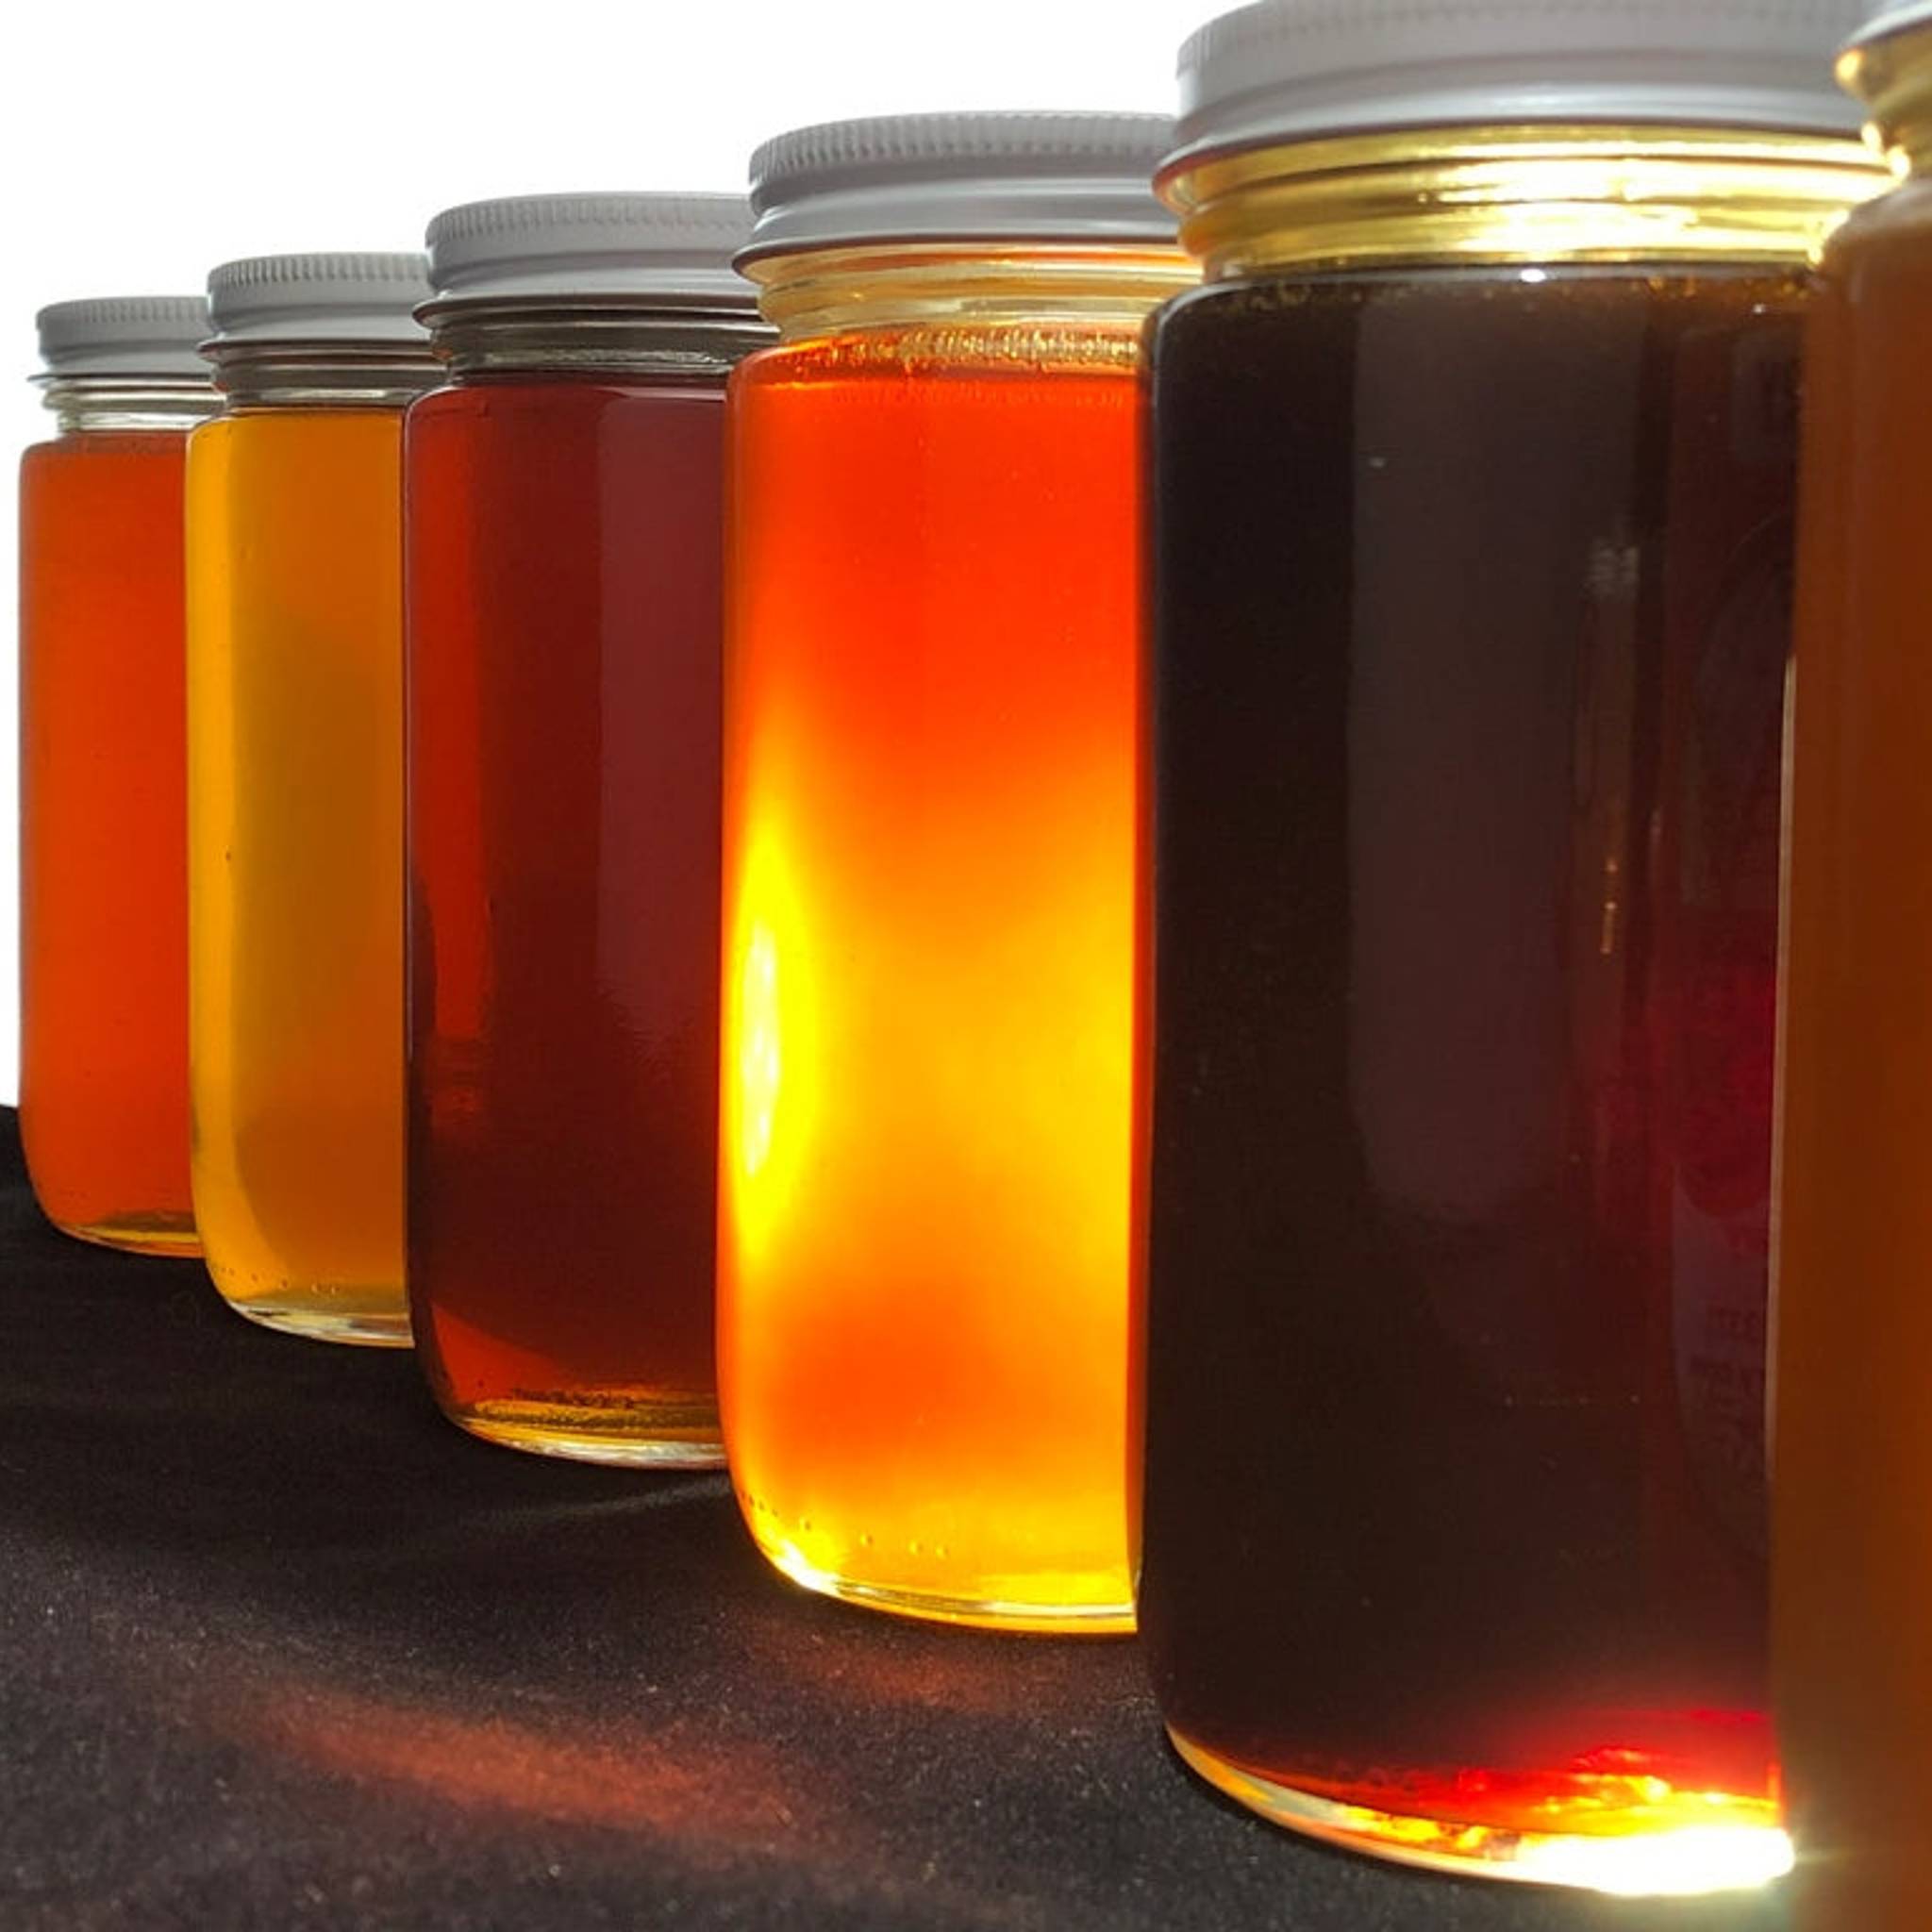 Mill Creek Apiary honey has varying color, taste, and texture